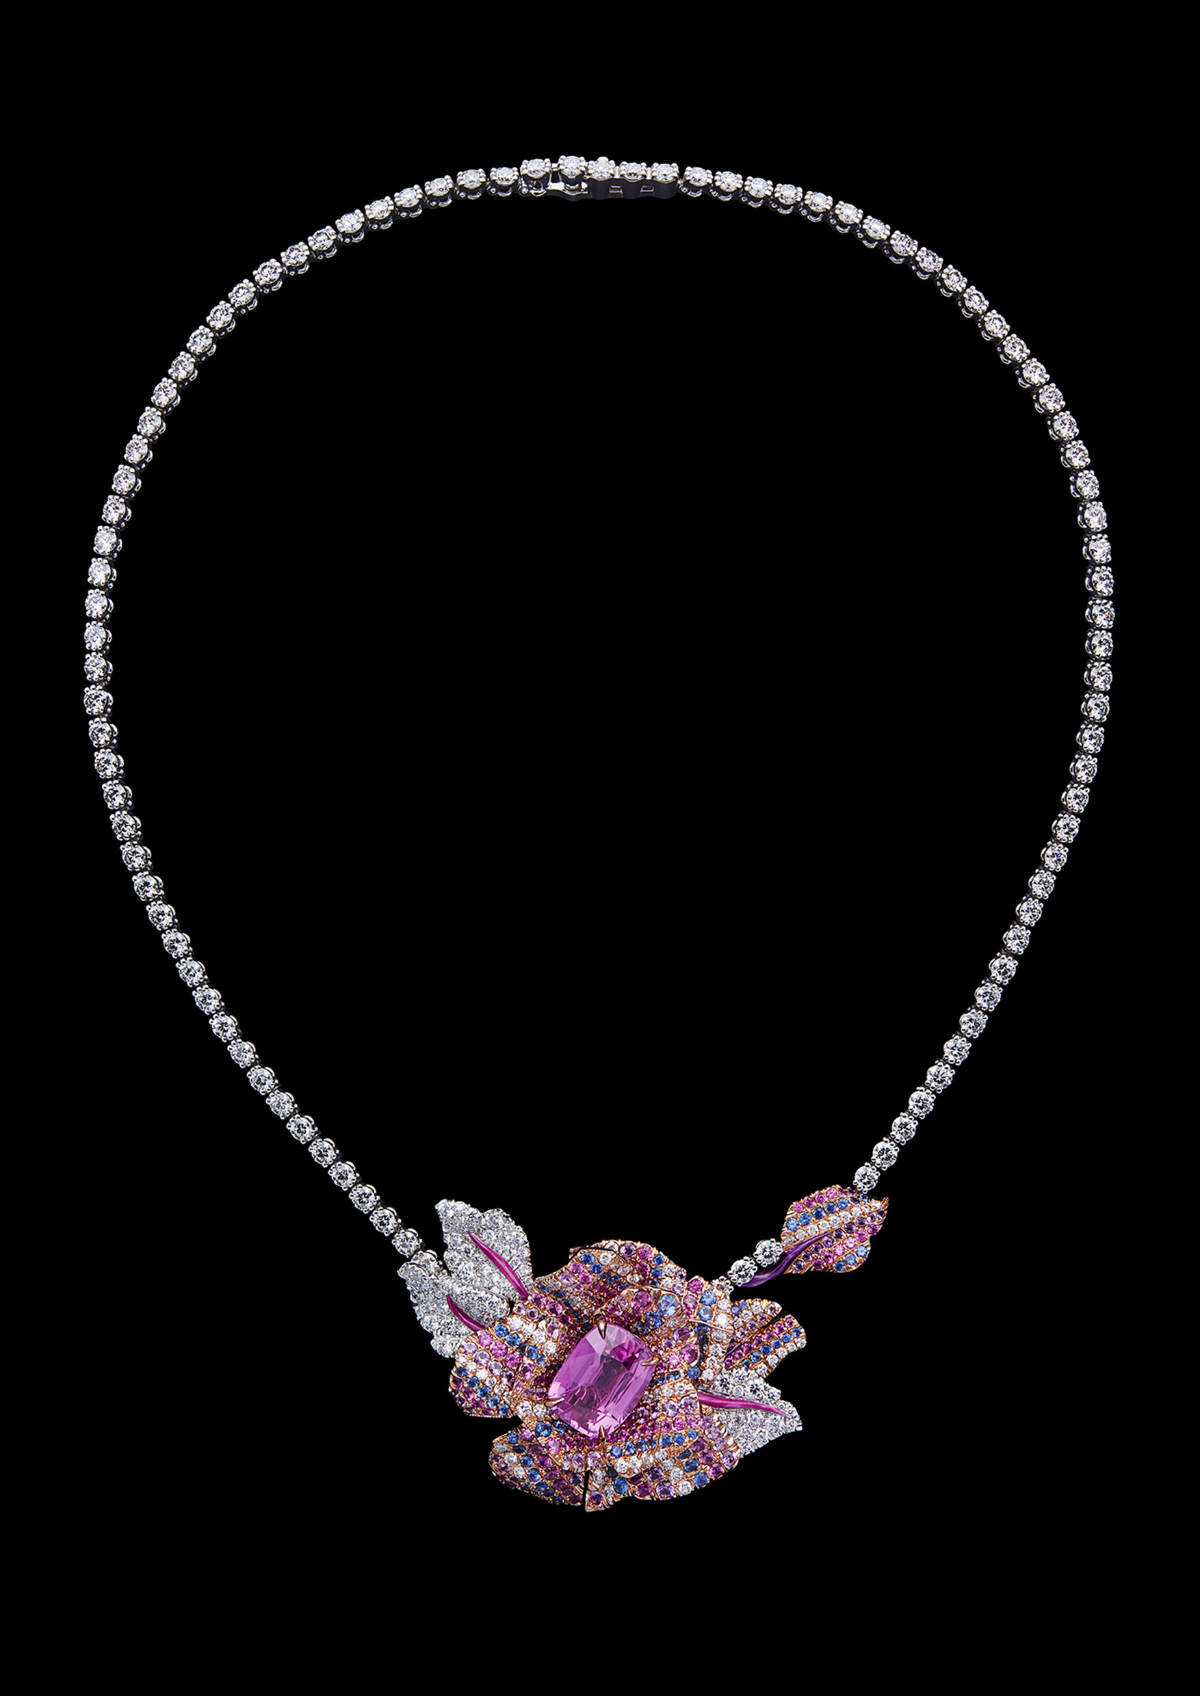 Dior Print High Jewelry Collection